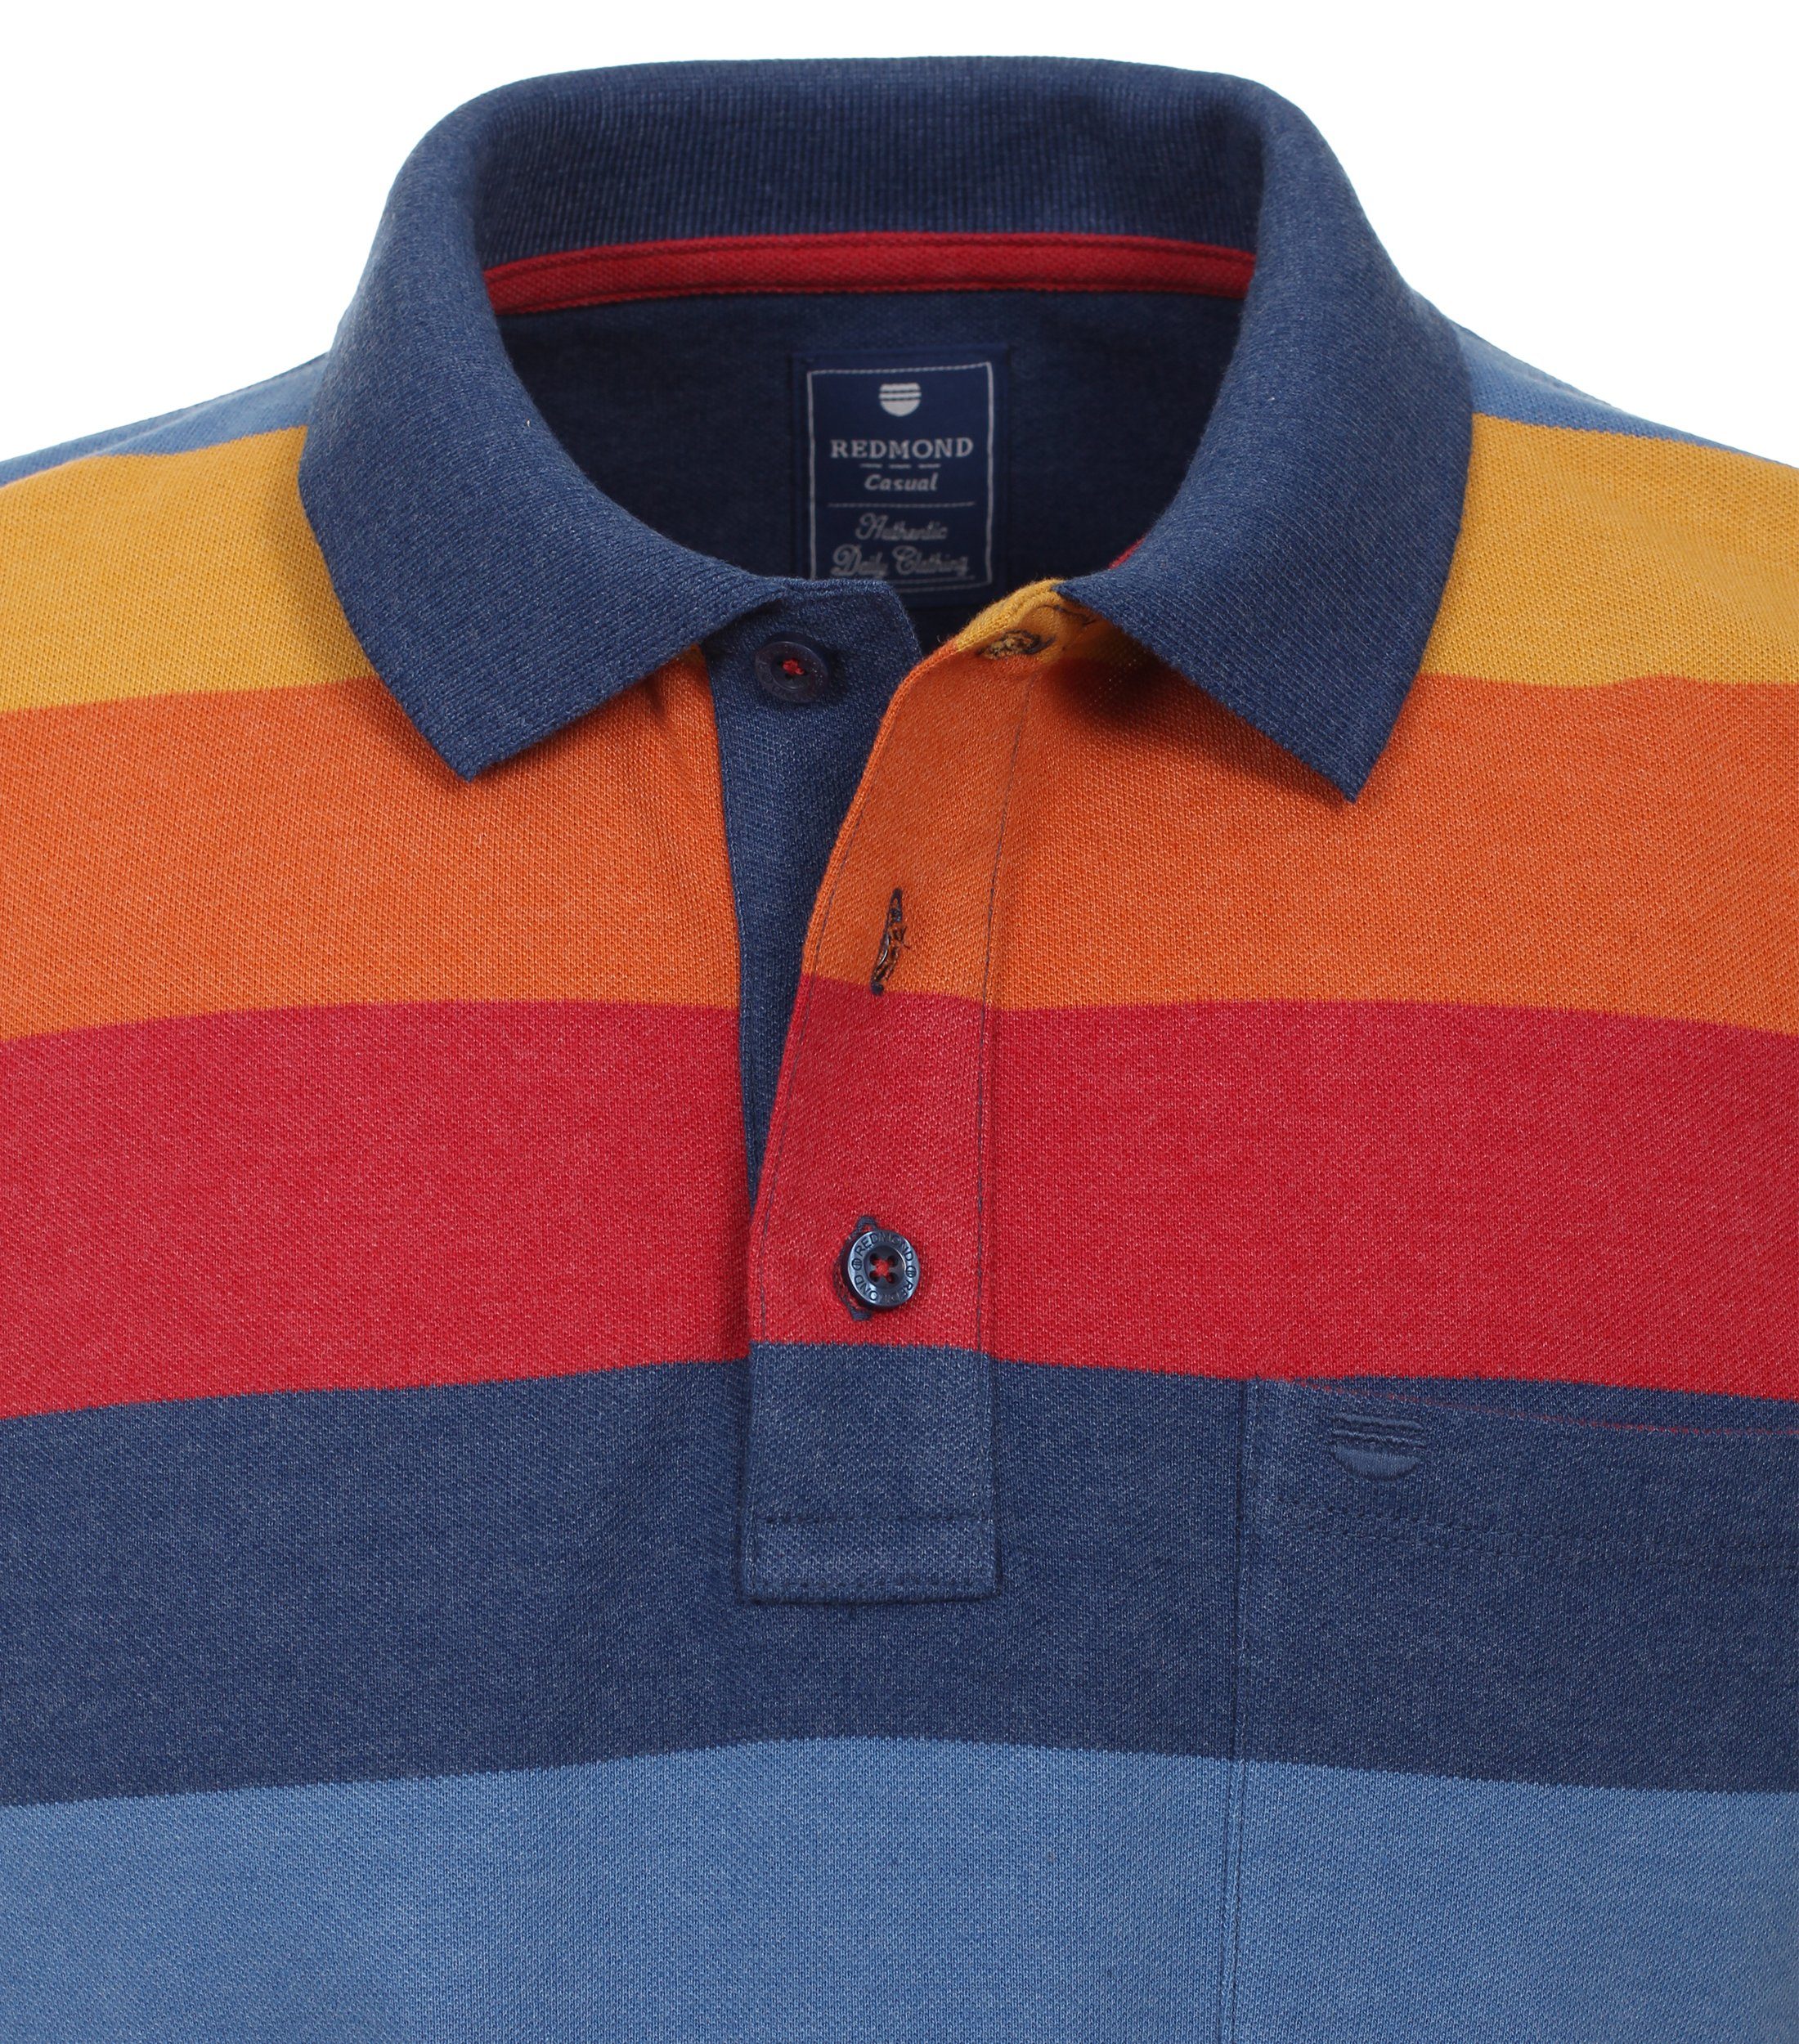 Redmond Poloshirt 50 andere Muster rot